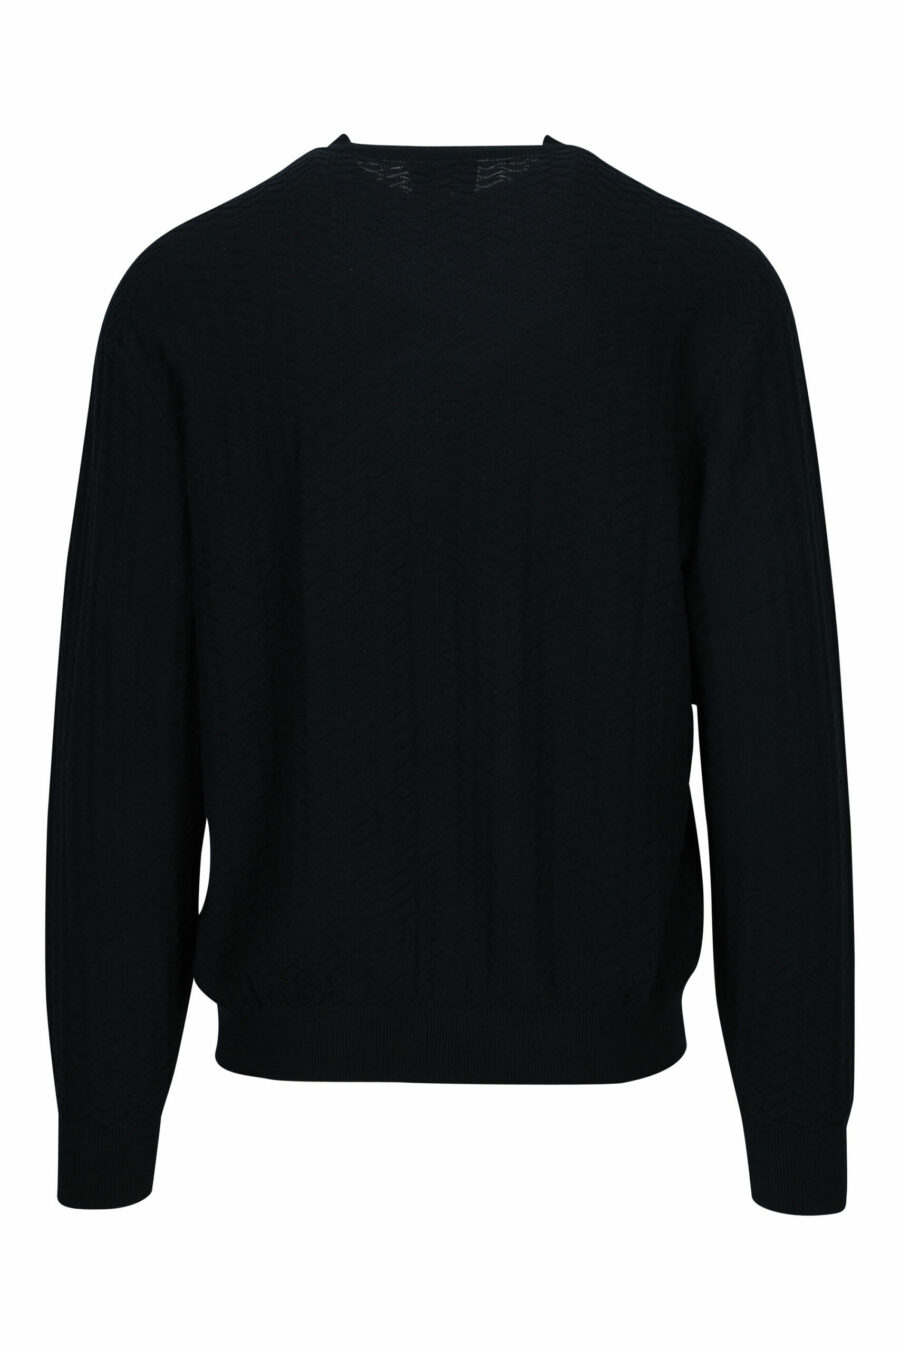 Black knitted jumper with eagle mini logo - 8058947973712 1 scaled